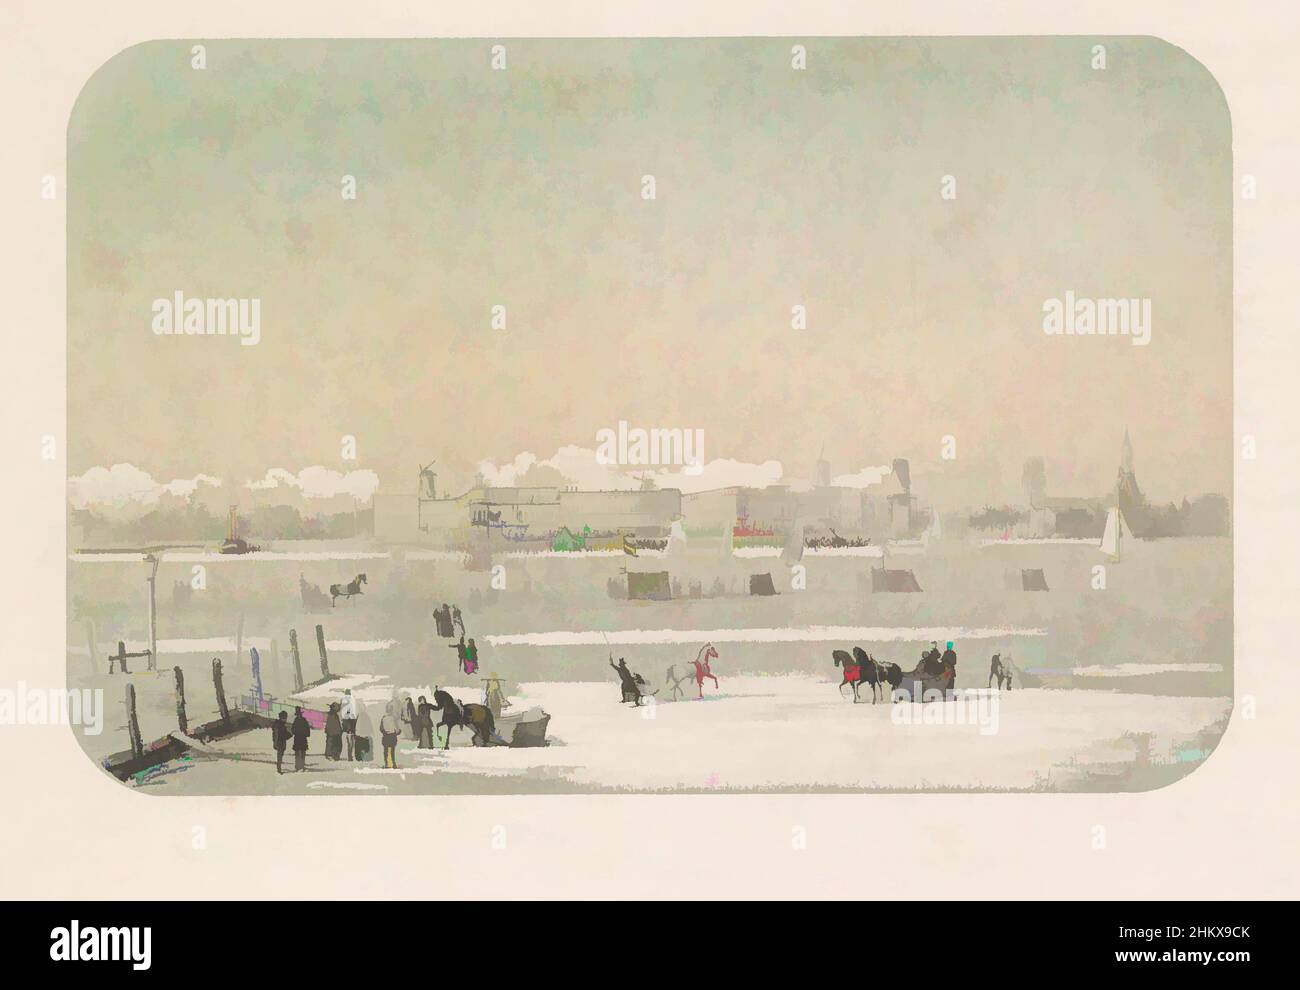 Art inspired by Ice pleasure on the river Maas at Rotterdam, seen from Katendrecht, 1855, The city seen from Katendrecht, The ice pleasure on the river Maas at Rotterdam in February 1855, with captions, Ice pleasure on the river Maas at Rotterdam, seen from Katendrecht, 1855. First, Classic works modernized by Artotop with a splash of modernity. Shapes, color and value, eye-catching visual impact on art. Emotions through freedom of artworks in a contemporary way. A timeless message pursuing a wildly creative new direction. Artists turning to the digital medium and creating the Artotop NFT Stock Photo